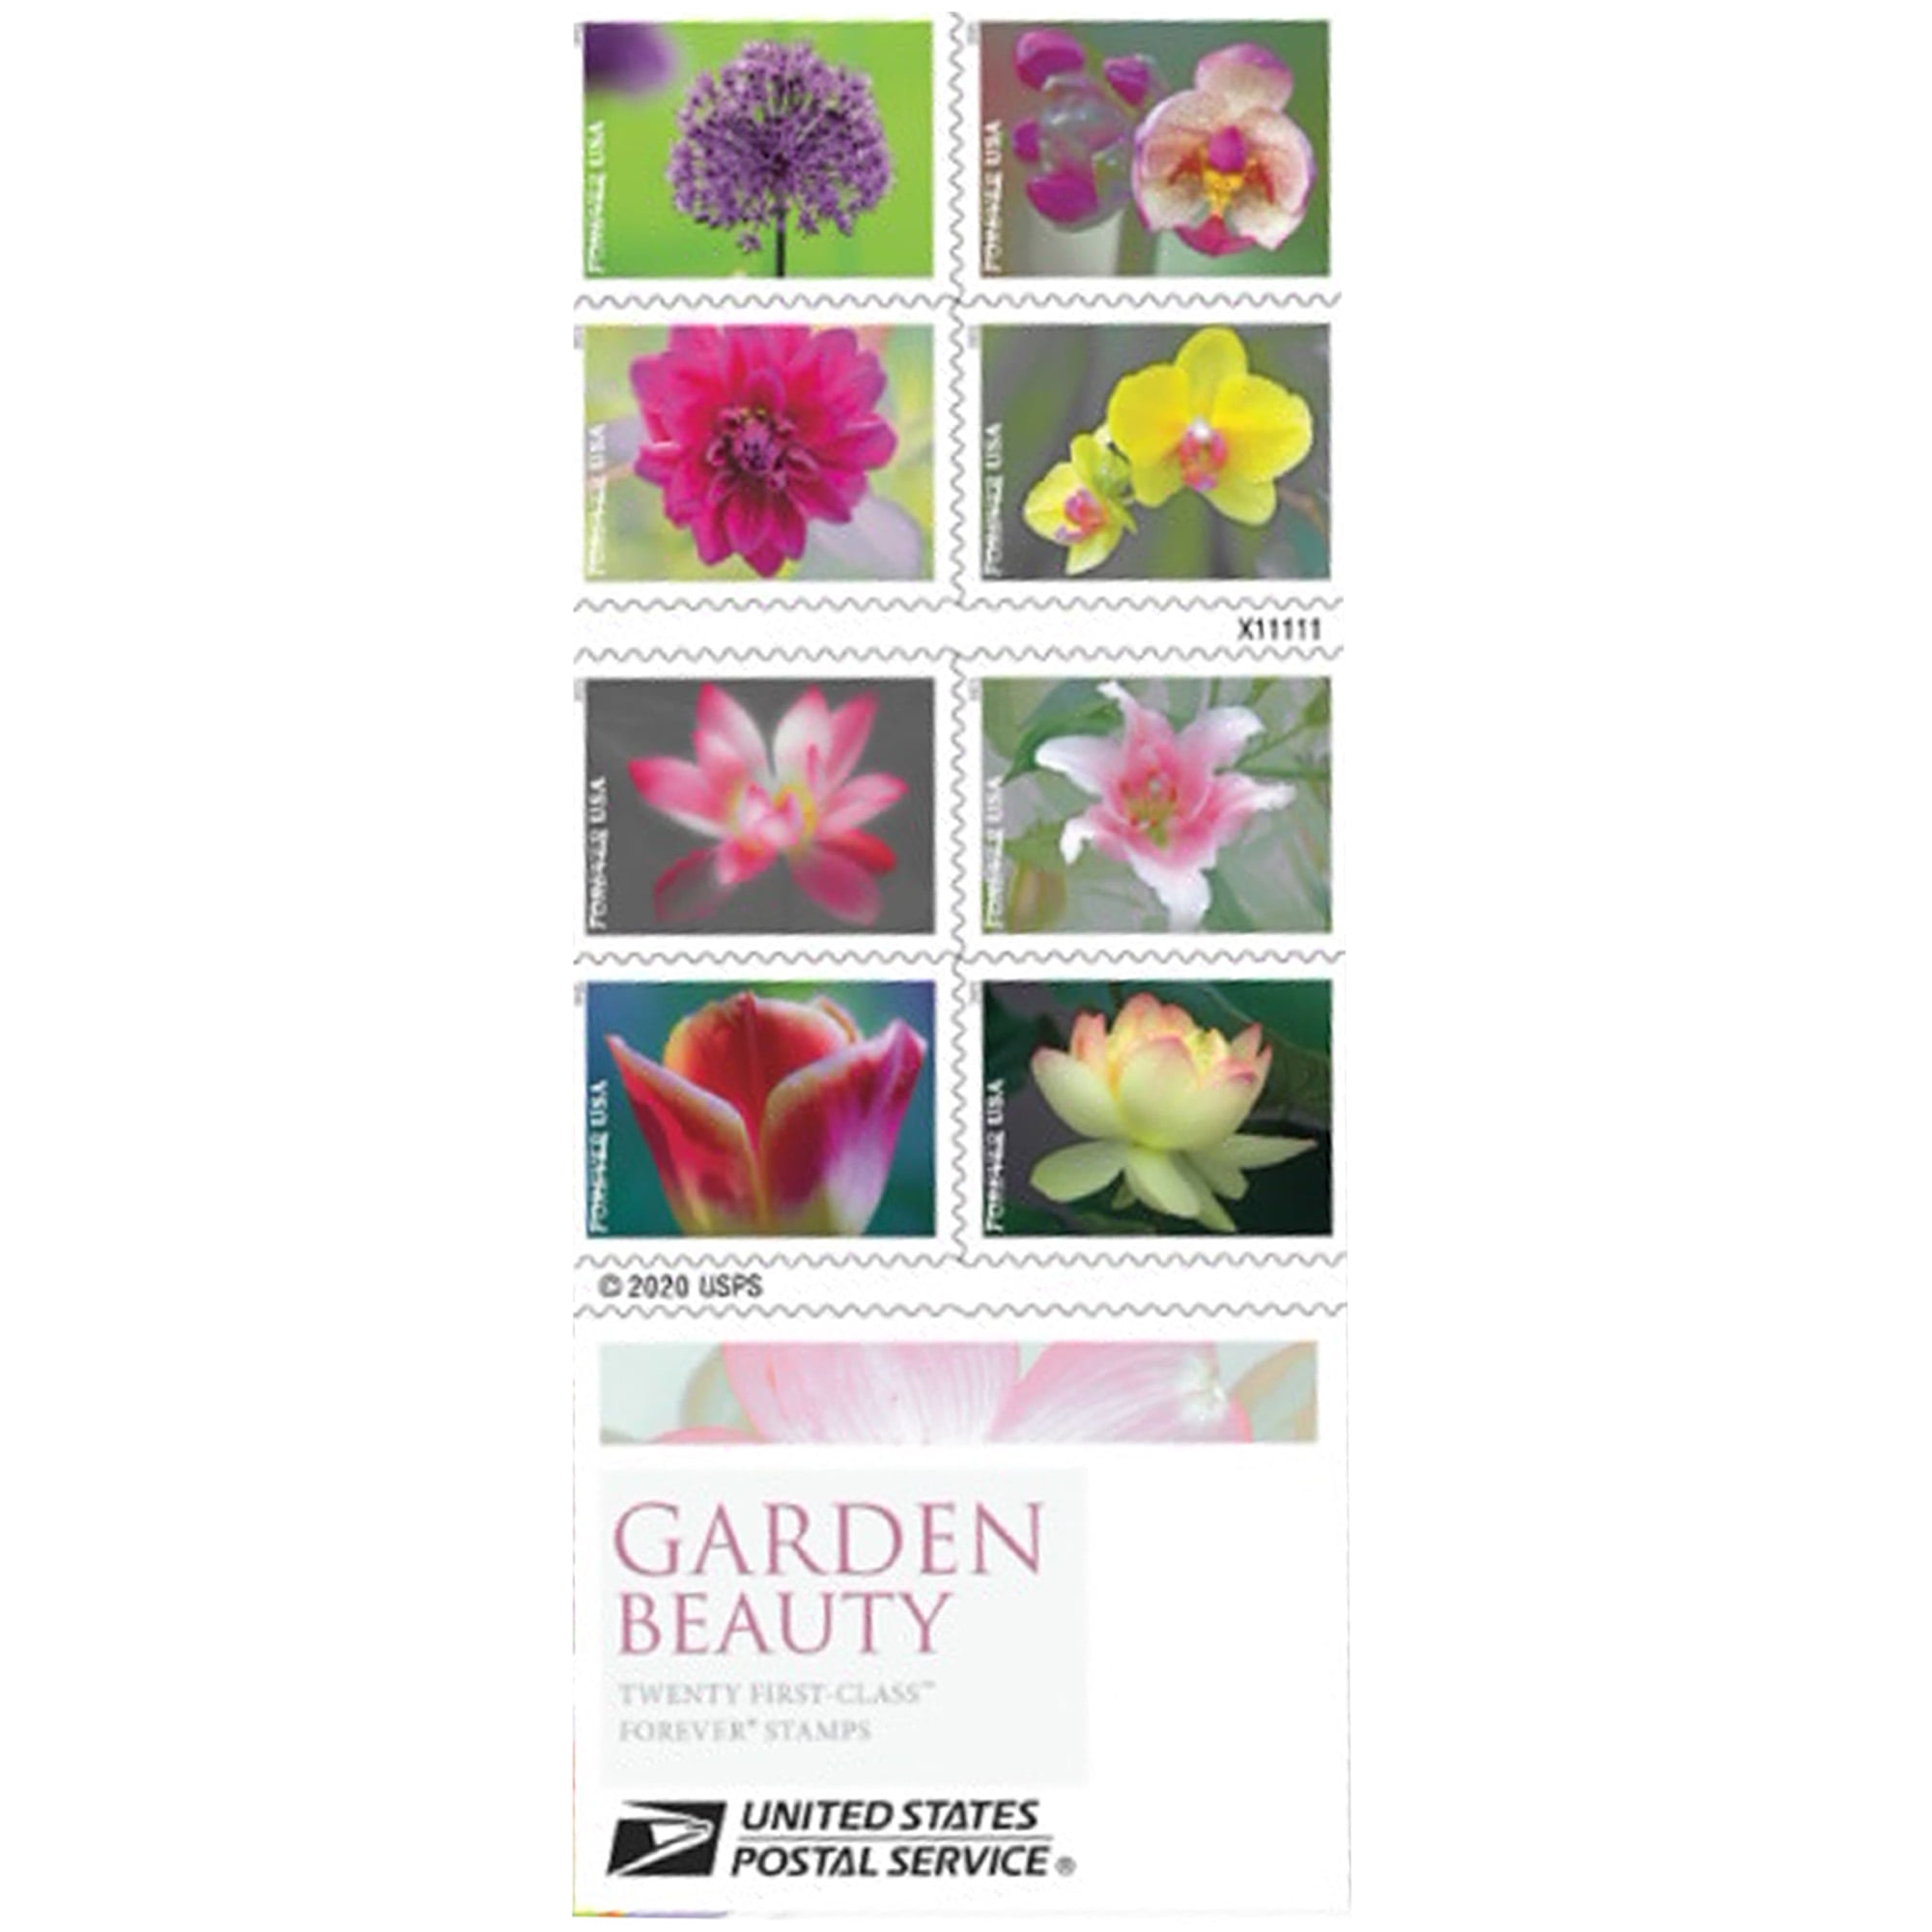 Mountain Flora Forever USPS Postage Stamp 5 Books Of 20 US Postal First  Class Wedding Celebration Anniversary Flower Party 100 Stamps From Clephan,  $6